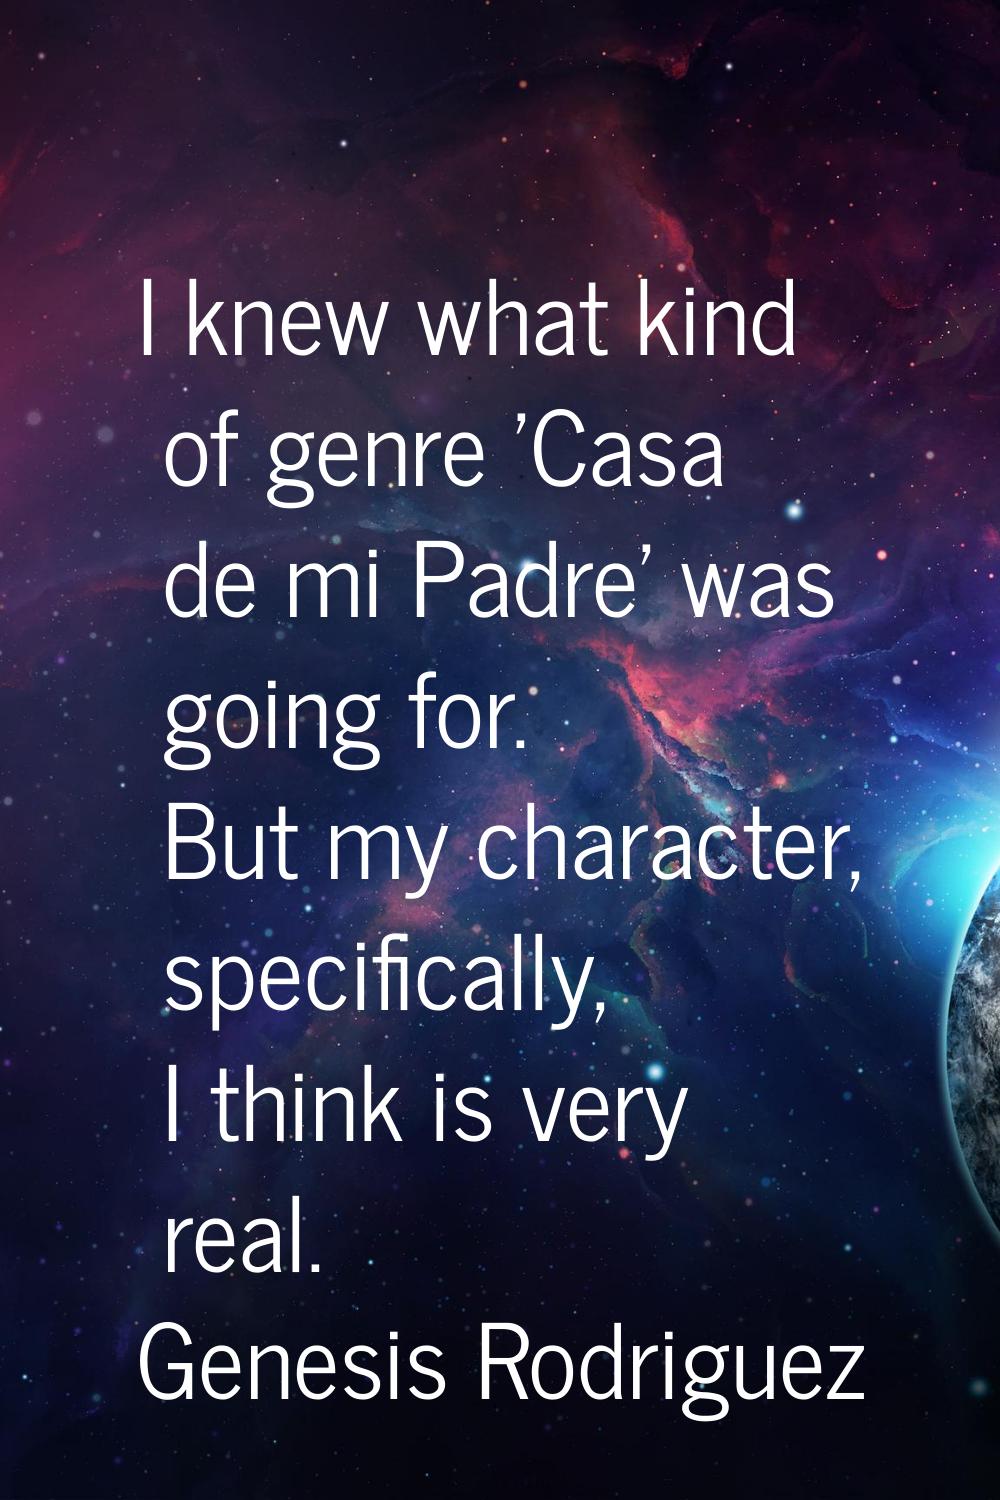 I knew what kind of genre 'Casa de mi Padre' was going for. But my character, specifically, I think